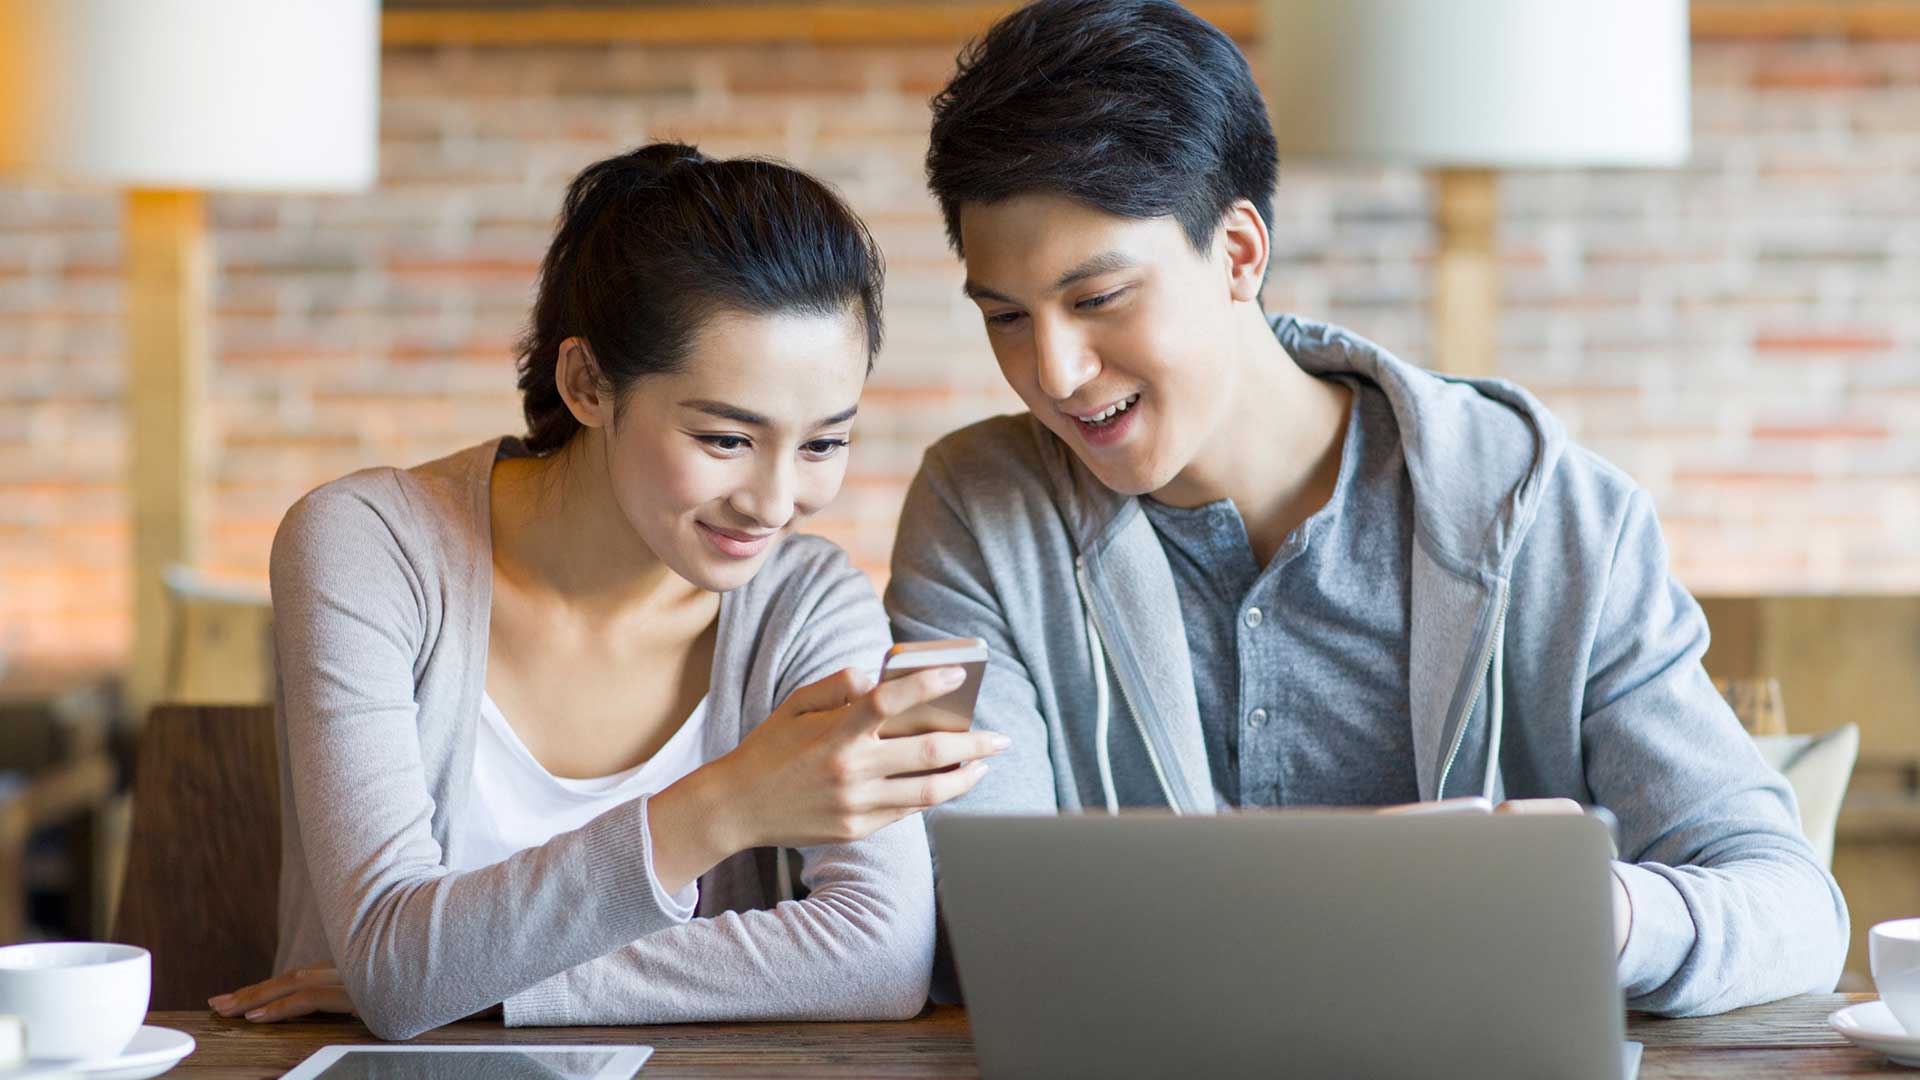 Young couple looking at mobile phone in front of computer; the image used for types of savings